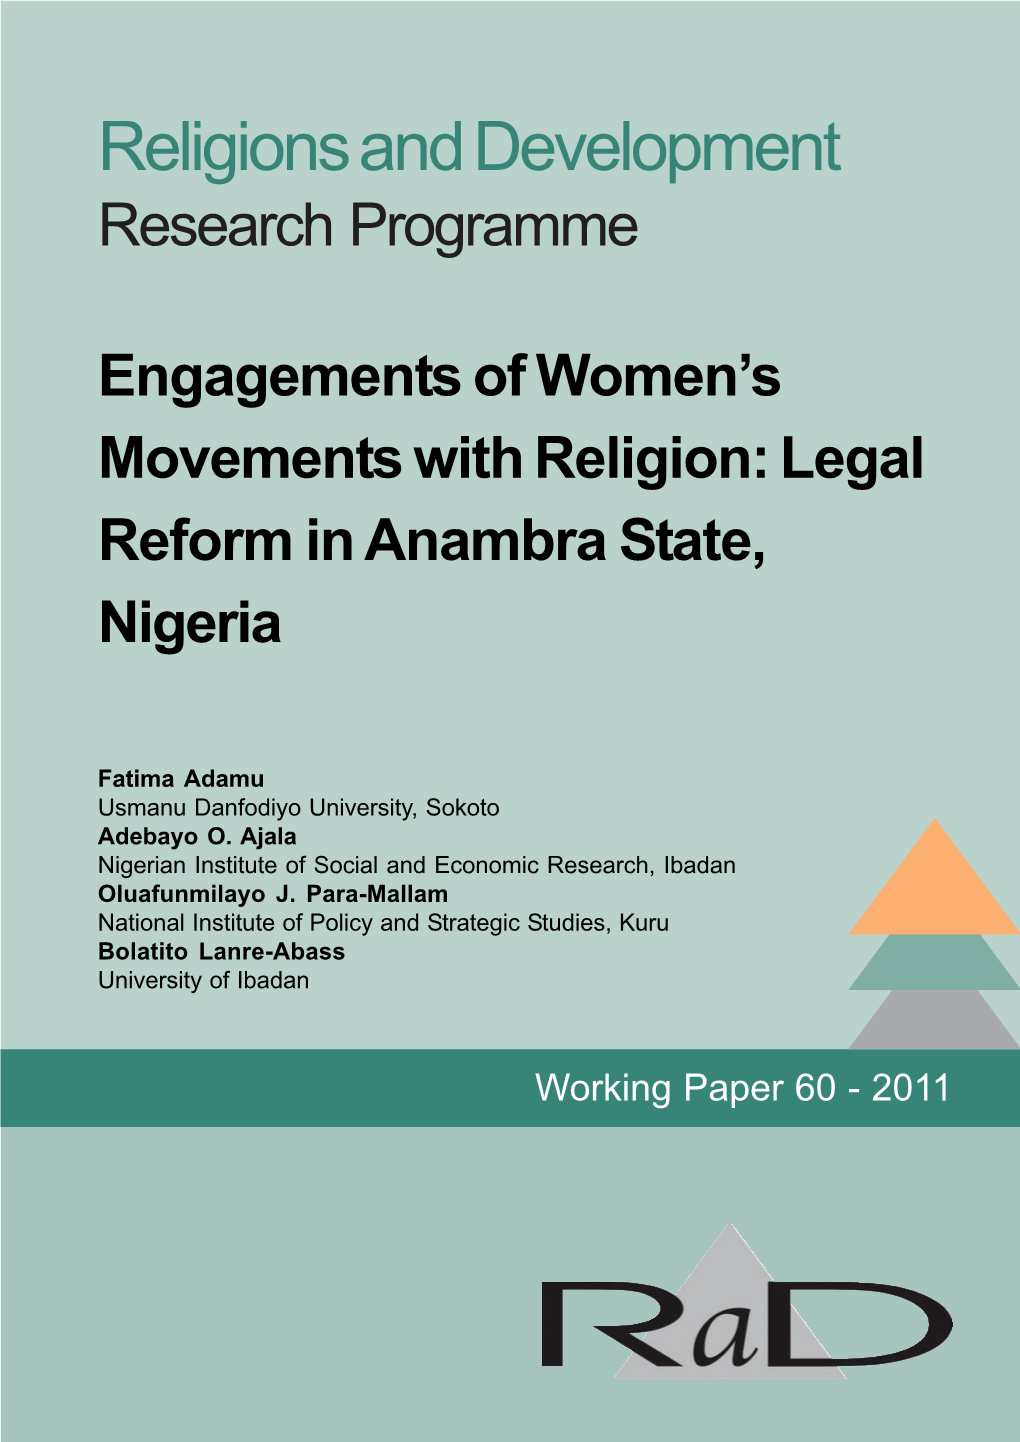 Engagements of Women's Movements with Religion: Legal Reform in Anambra State, Nigeria